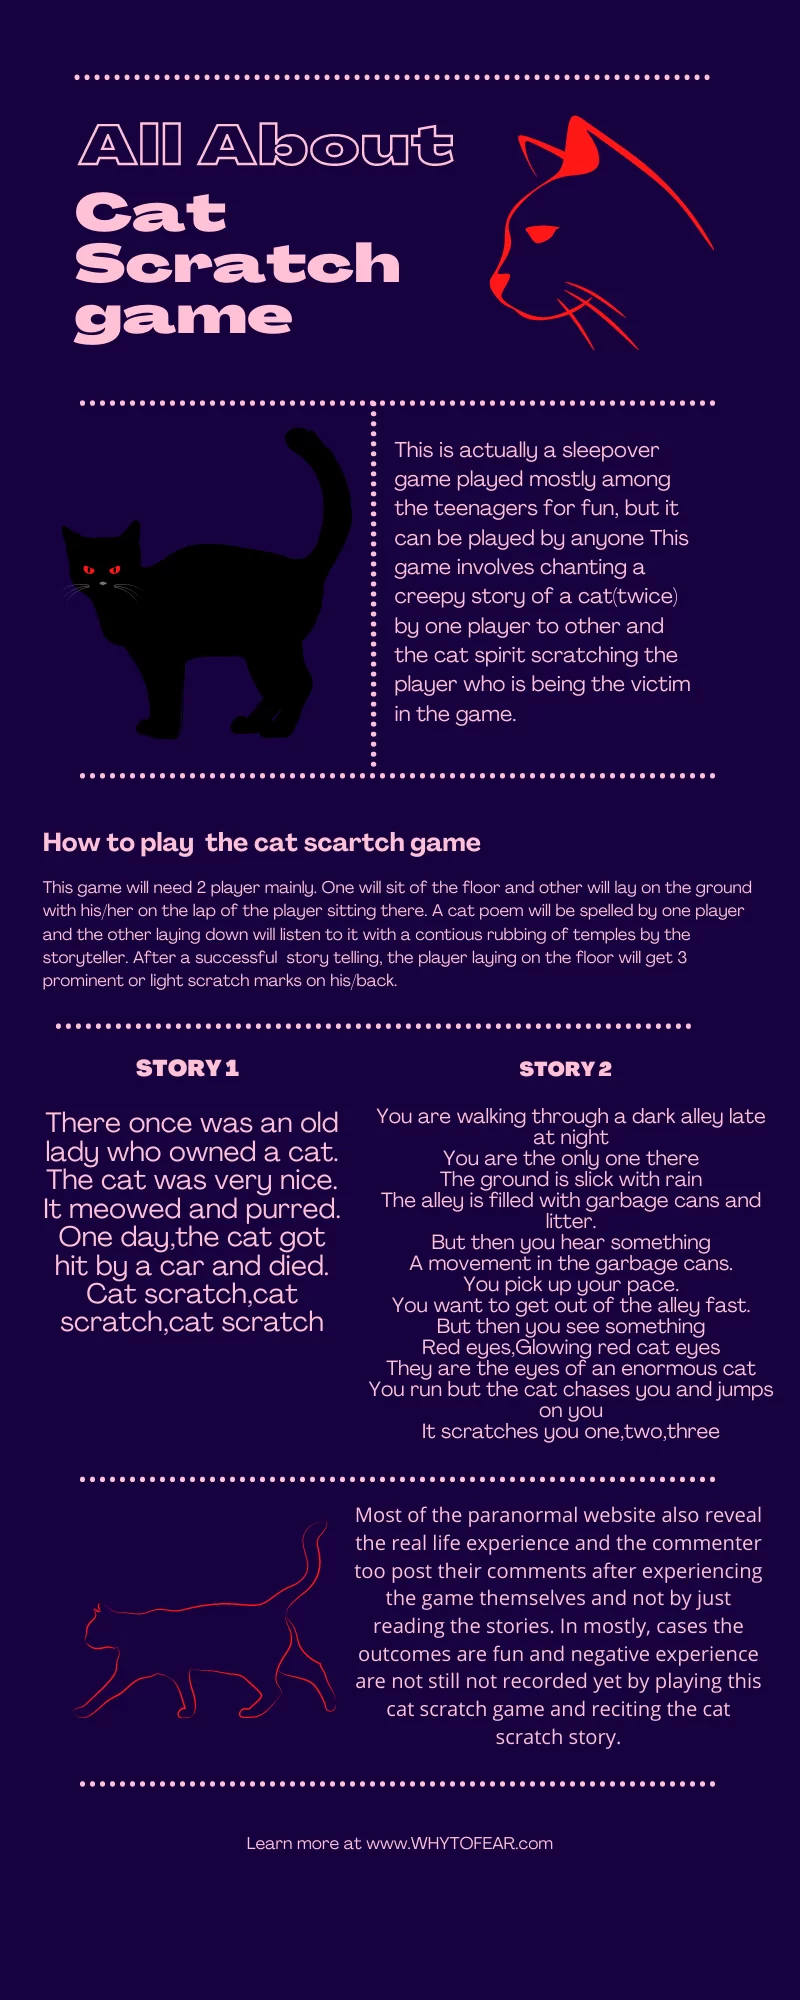 cat scratch game rules and story